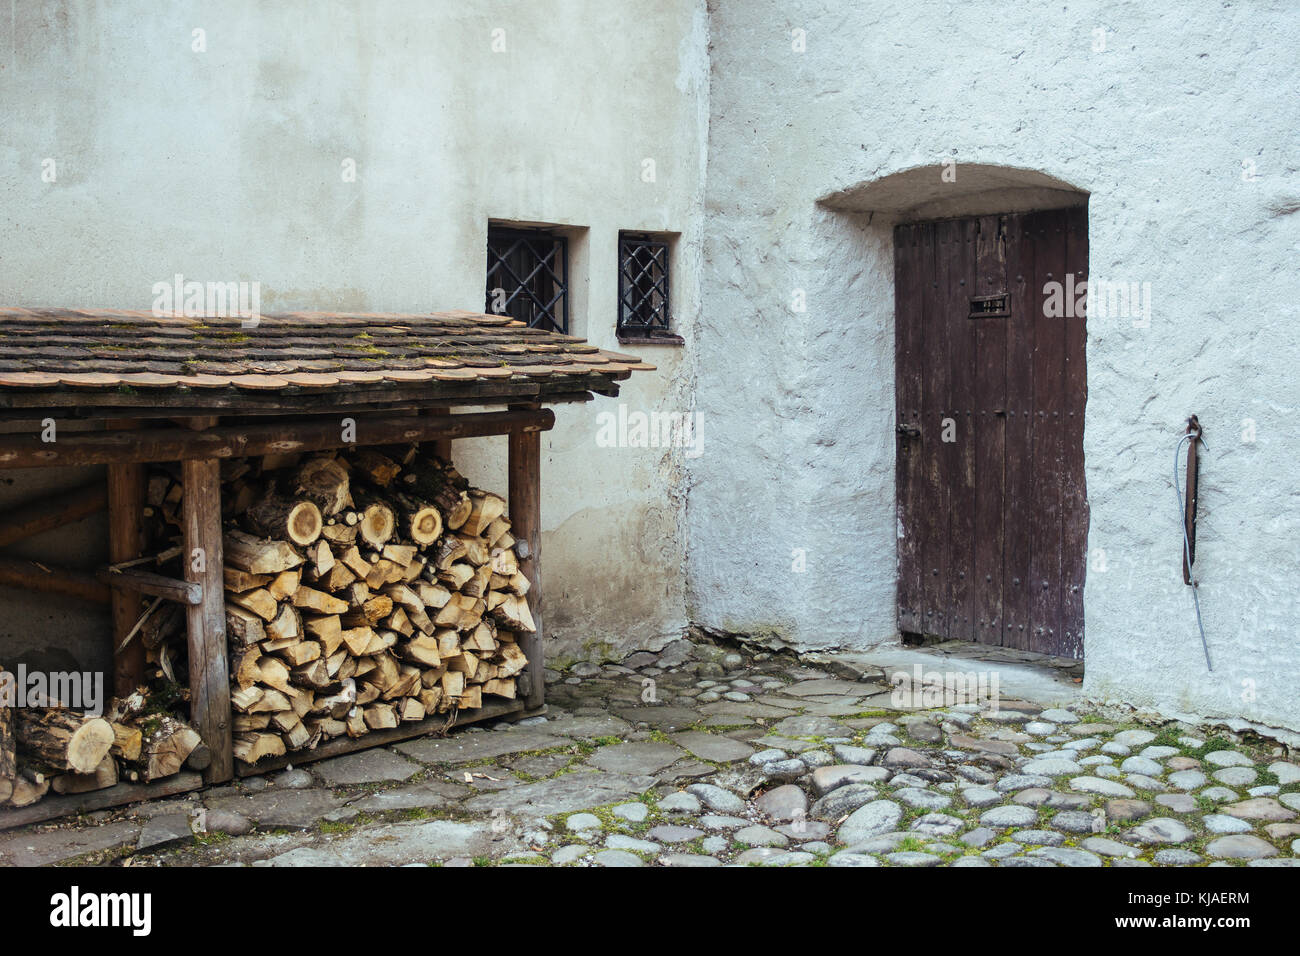 Pile of firewood against an old stone building corner Stock Photo